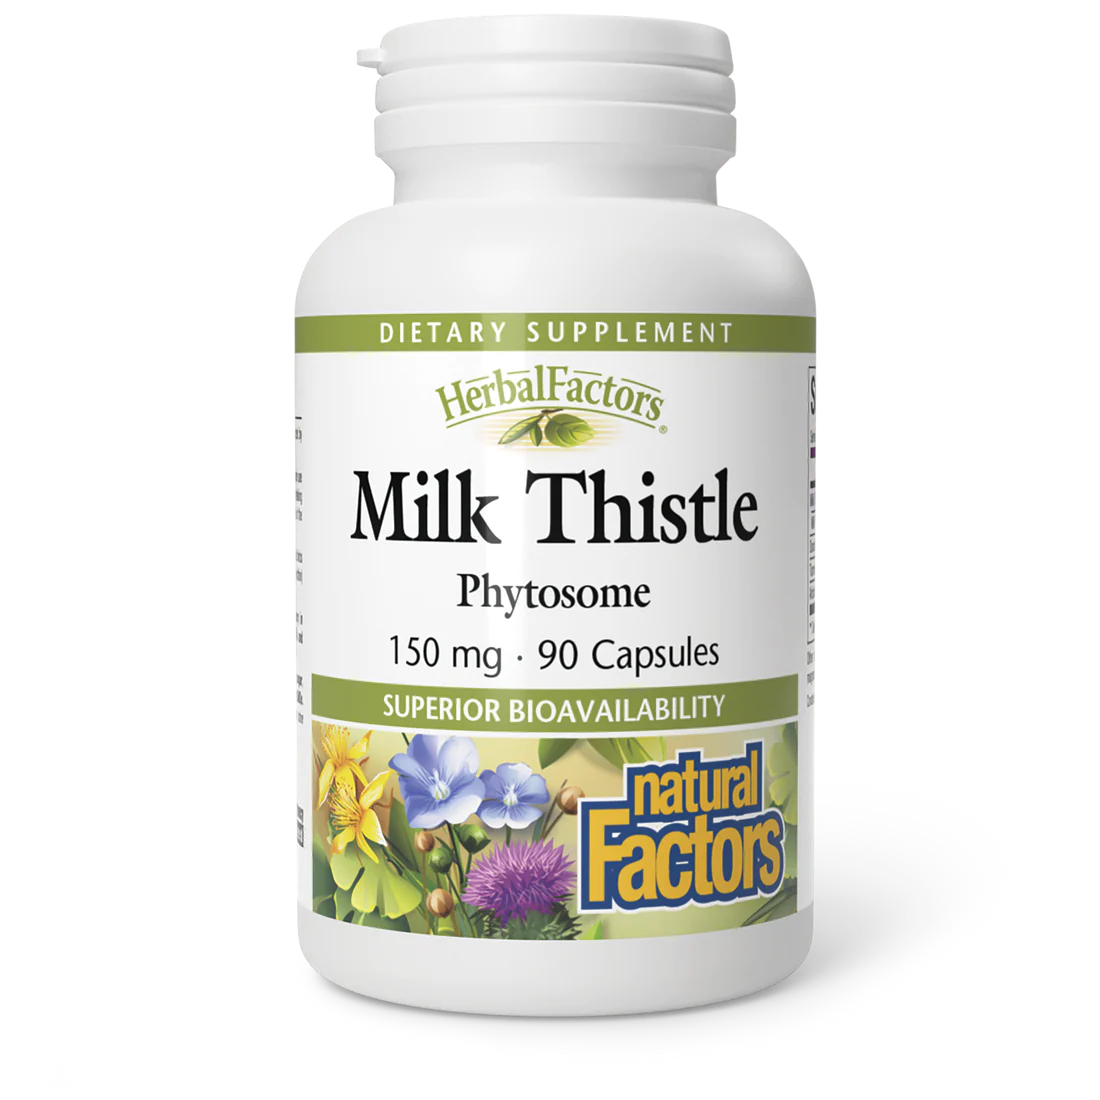 Milk Thistle Phytosome by Natural Factors, 90 capsules 150 mg